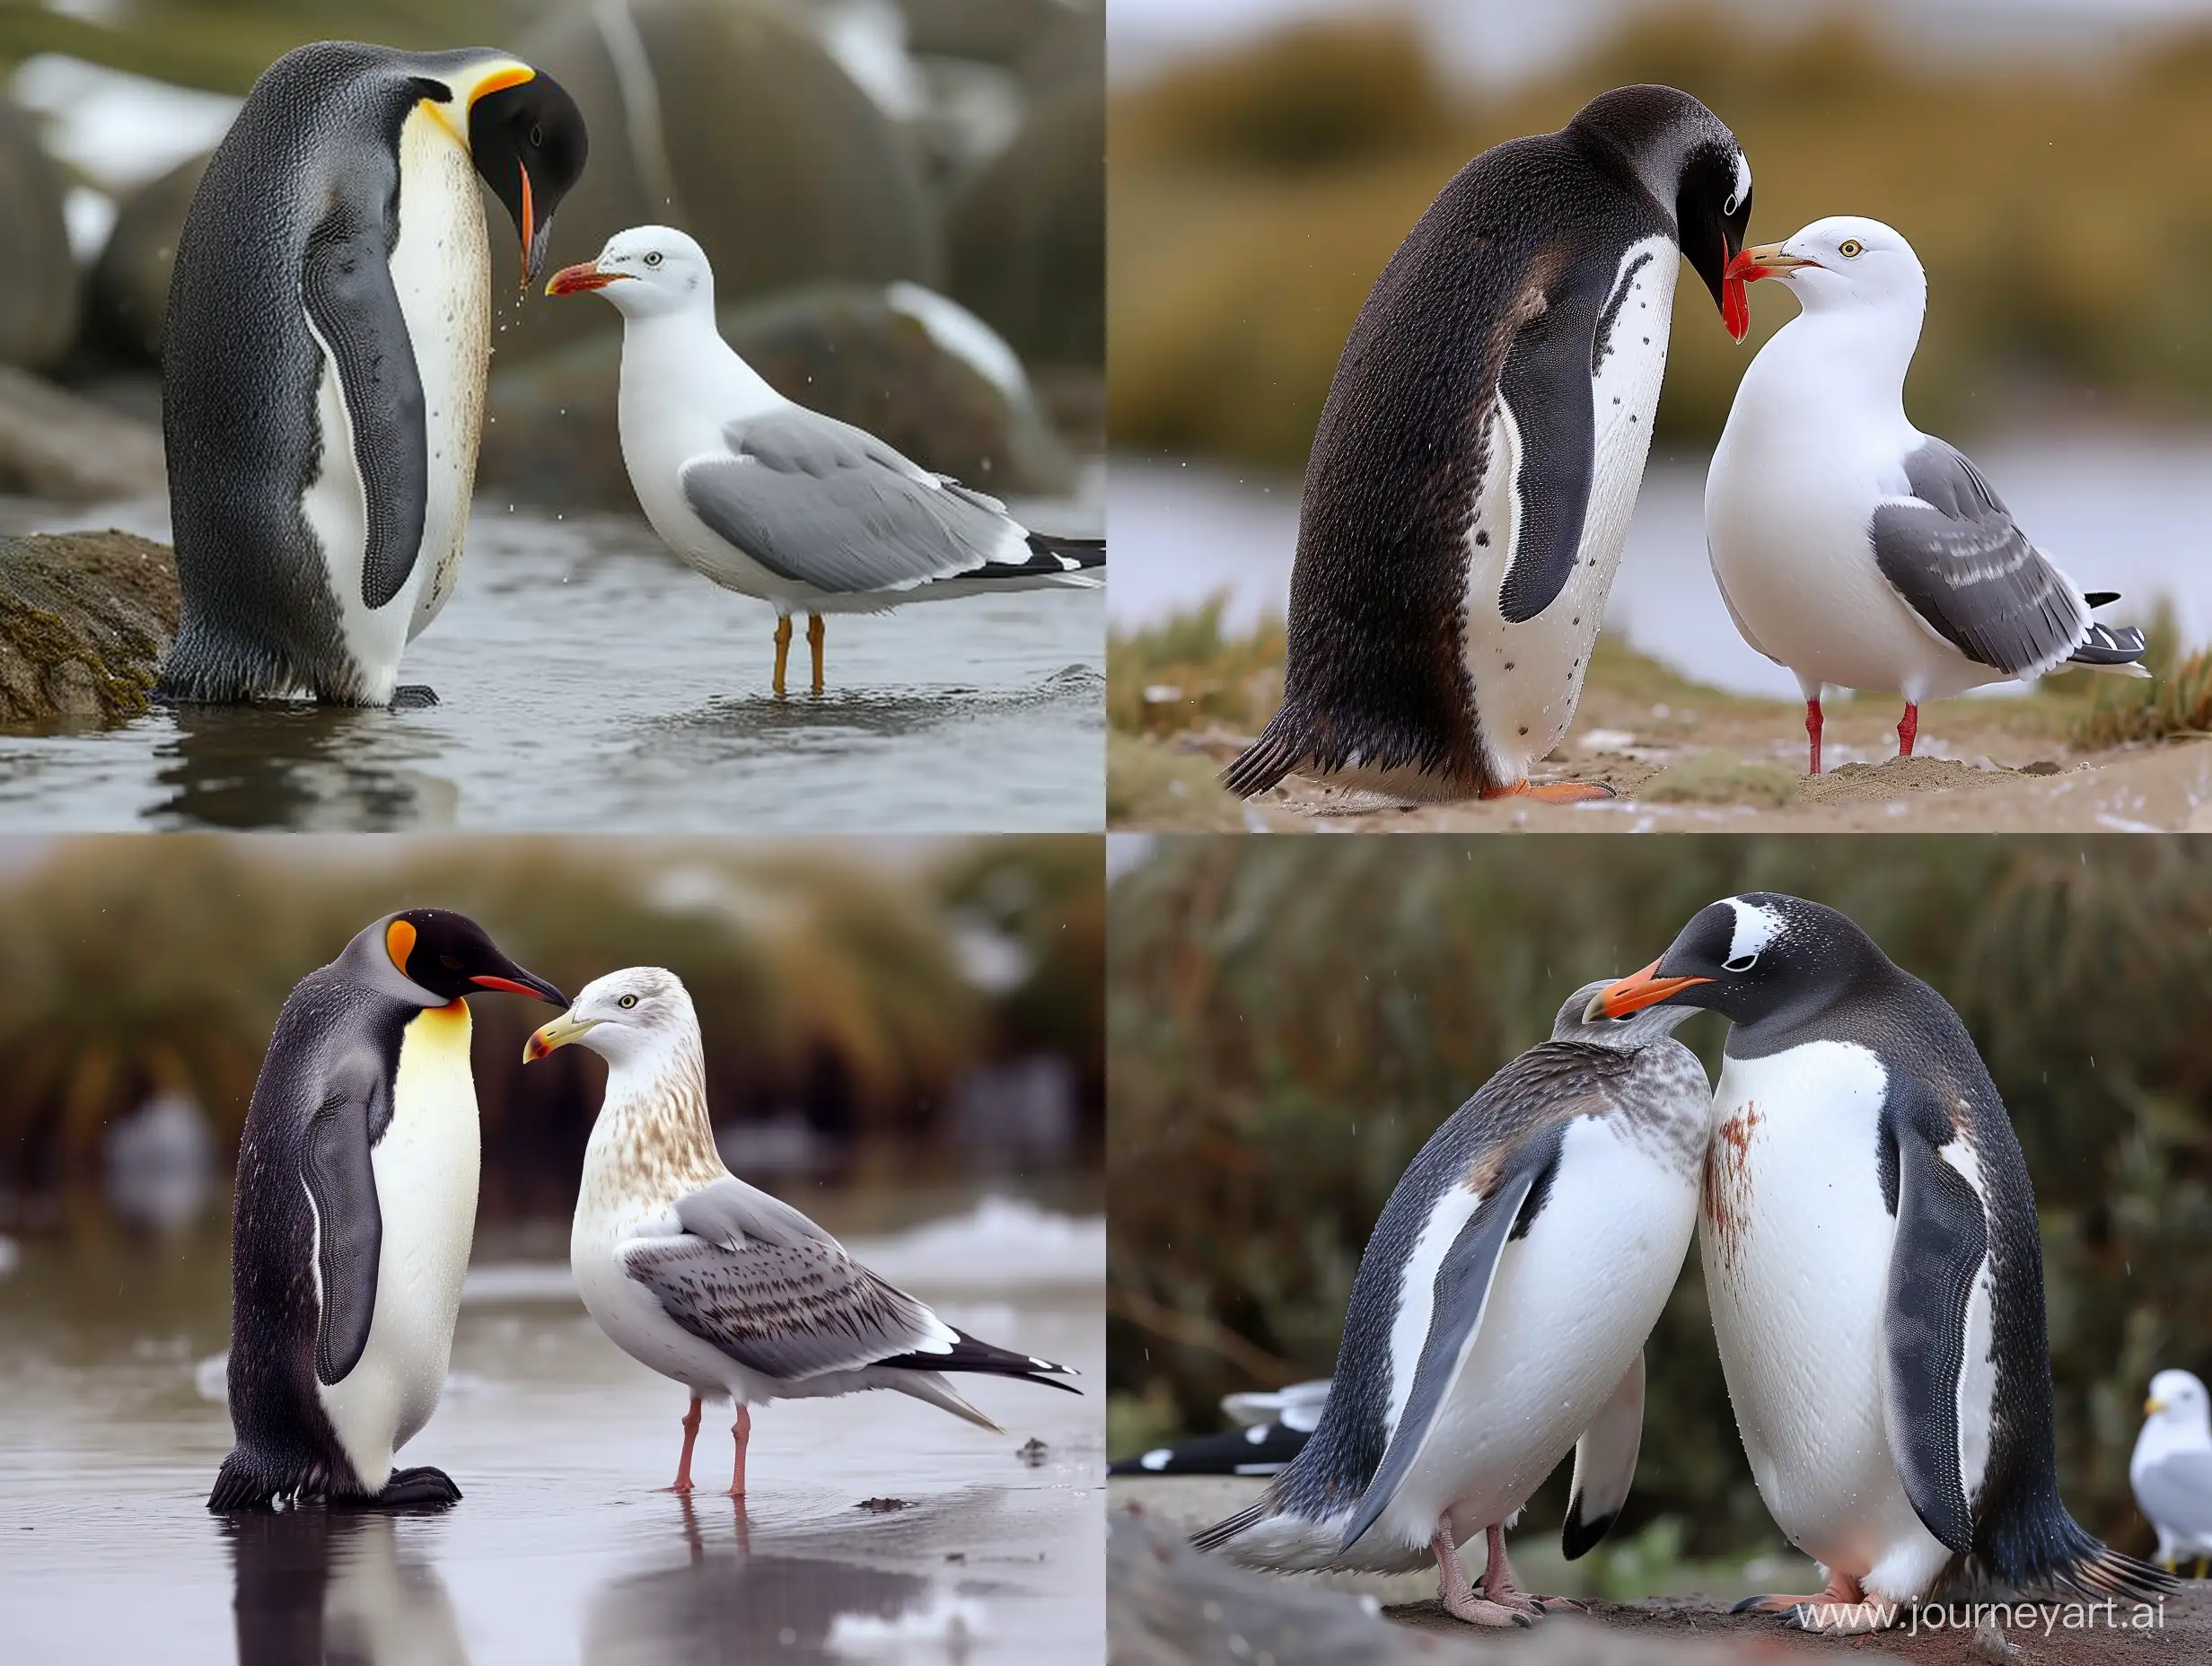 Romantic-Penguin-and-Seagull-Embrace-by-the-Shore